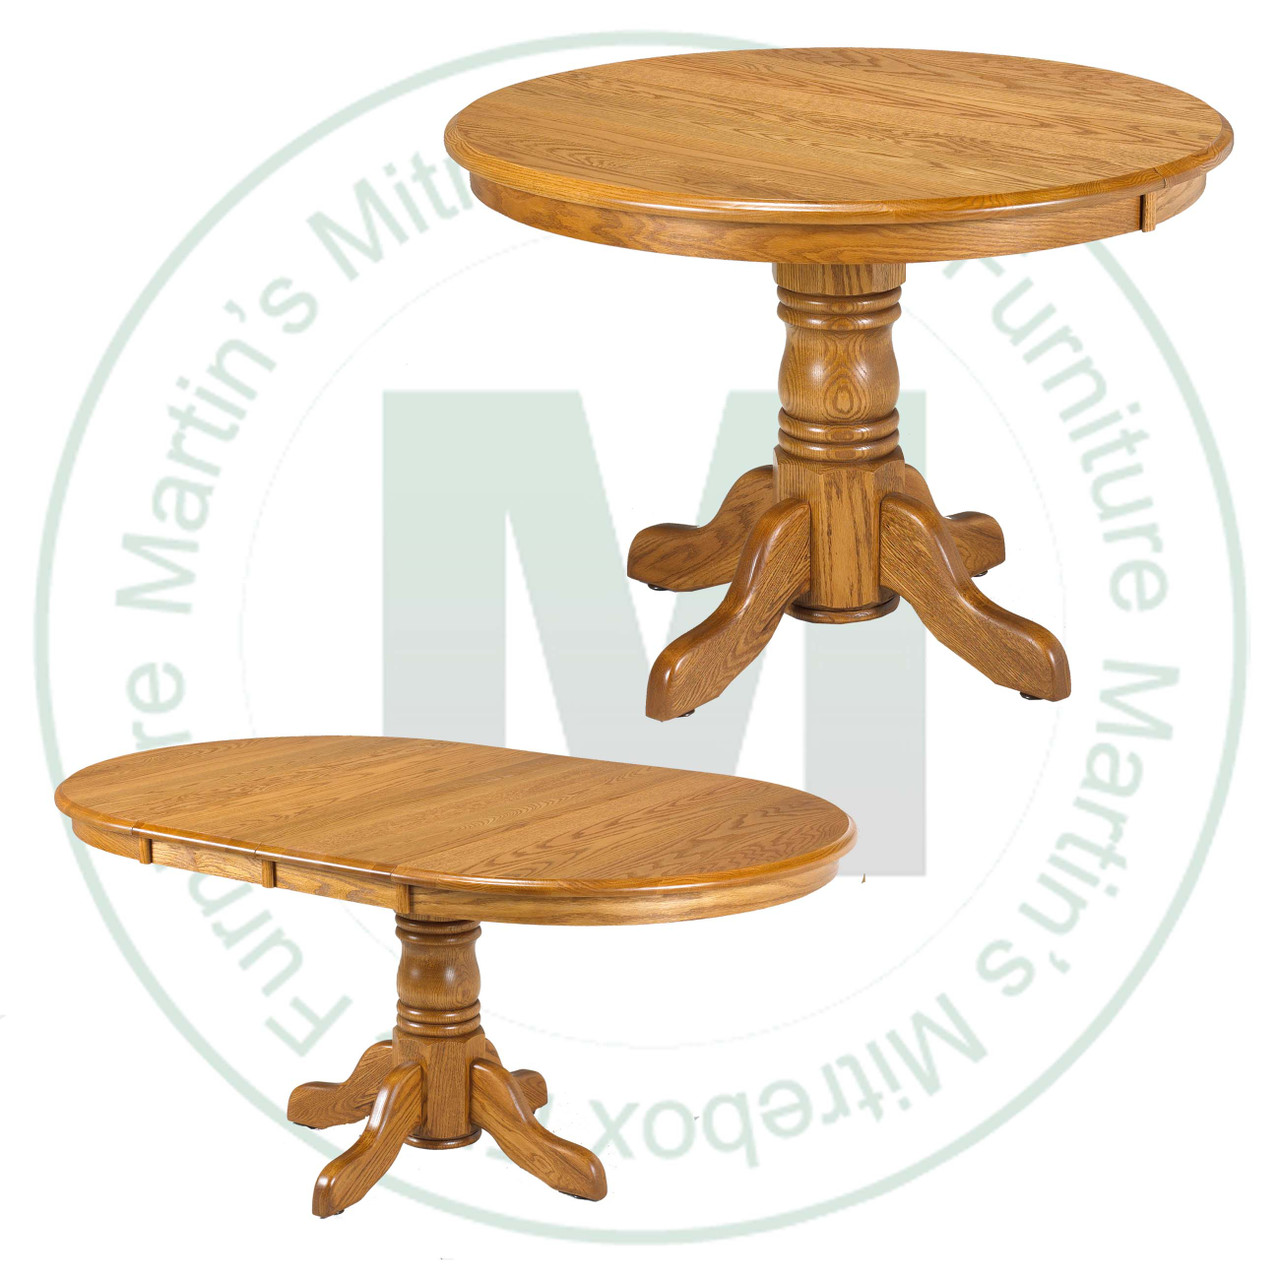 Maple Lancaster Collection Single Pedestal Table 42''D x 42''W x 30''H With 2 - 12'' Leaves. Table Has 1'' Thick Top